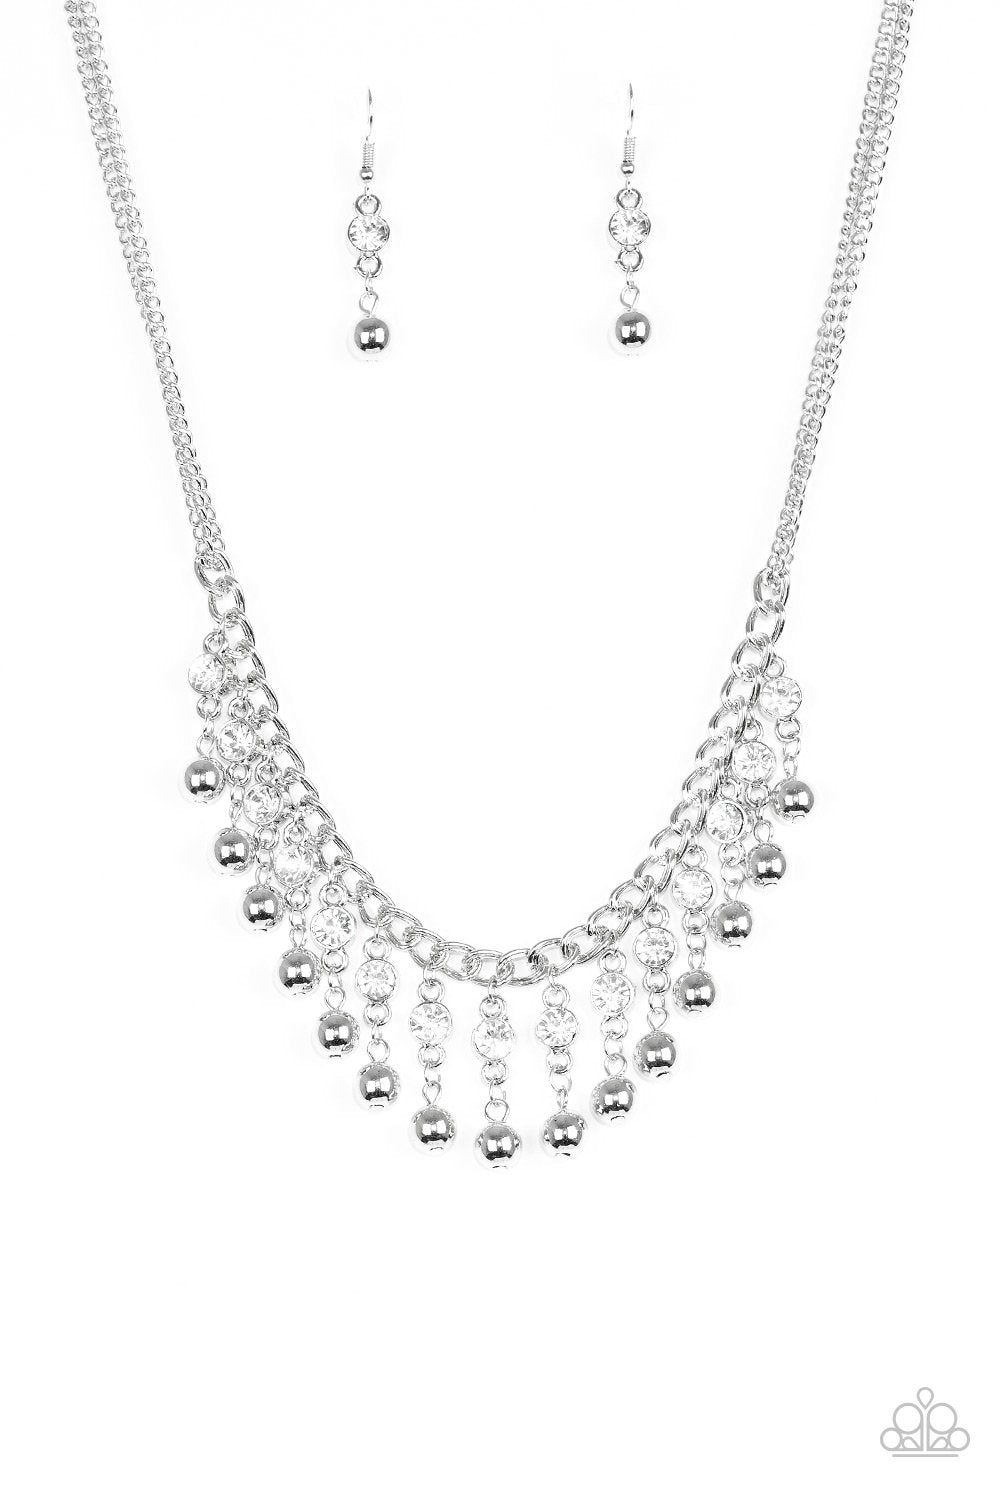 Pageant Queen Silver and White Rhinestone Necklace - Paparazzi Accessories-CarasShop.com - $5 Jewelry by Cara Jewels